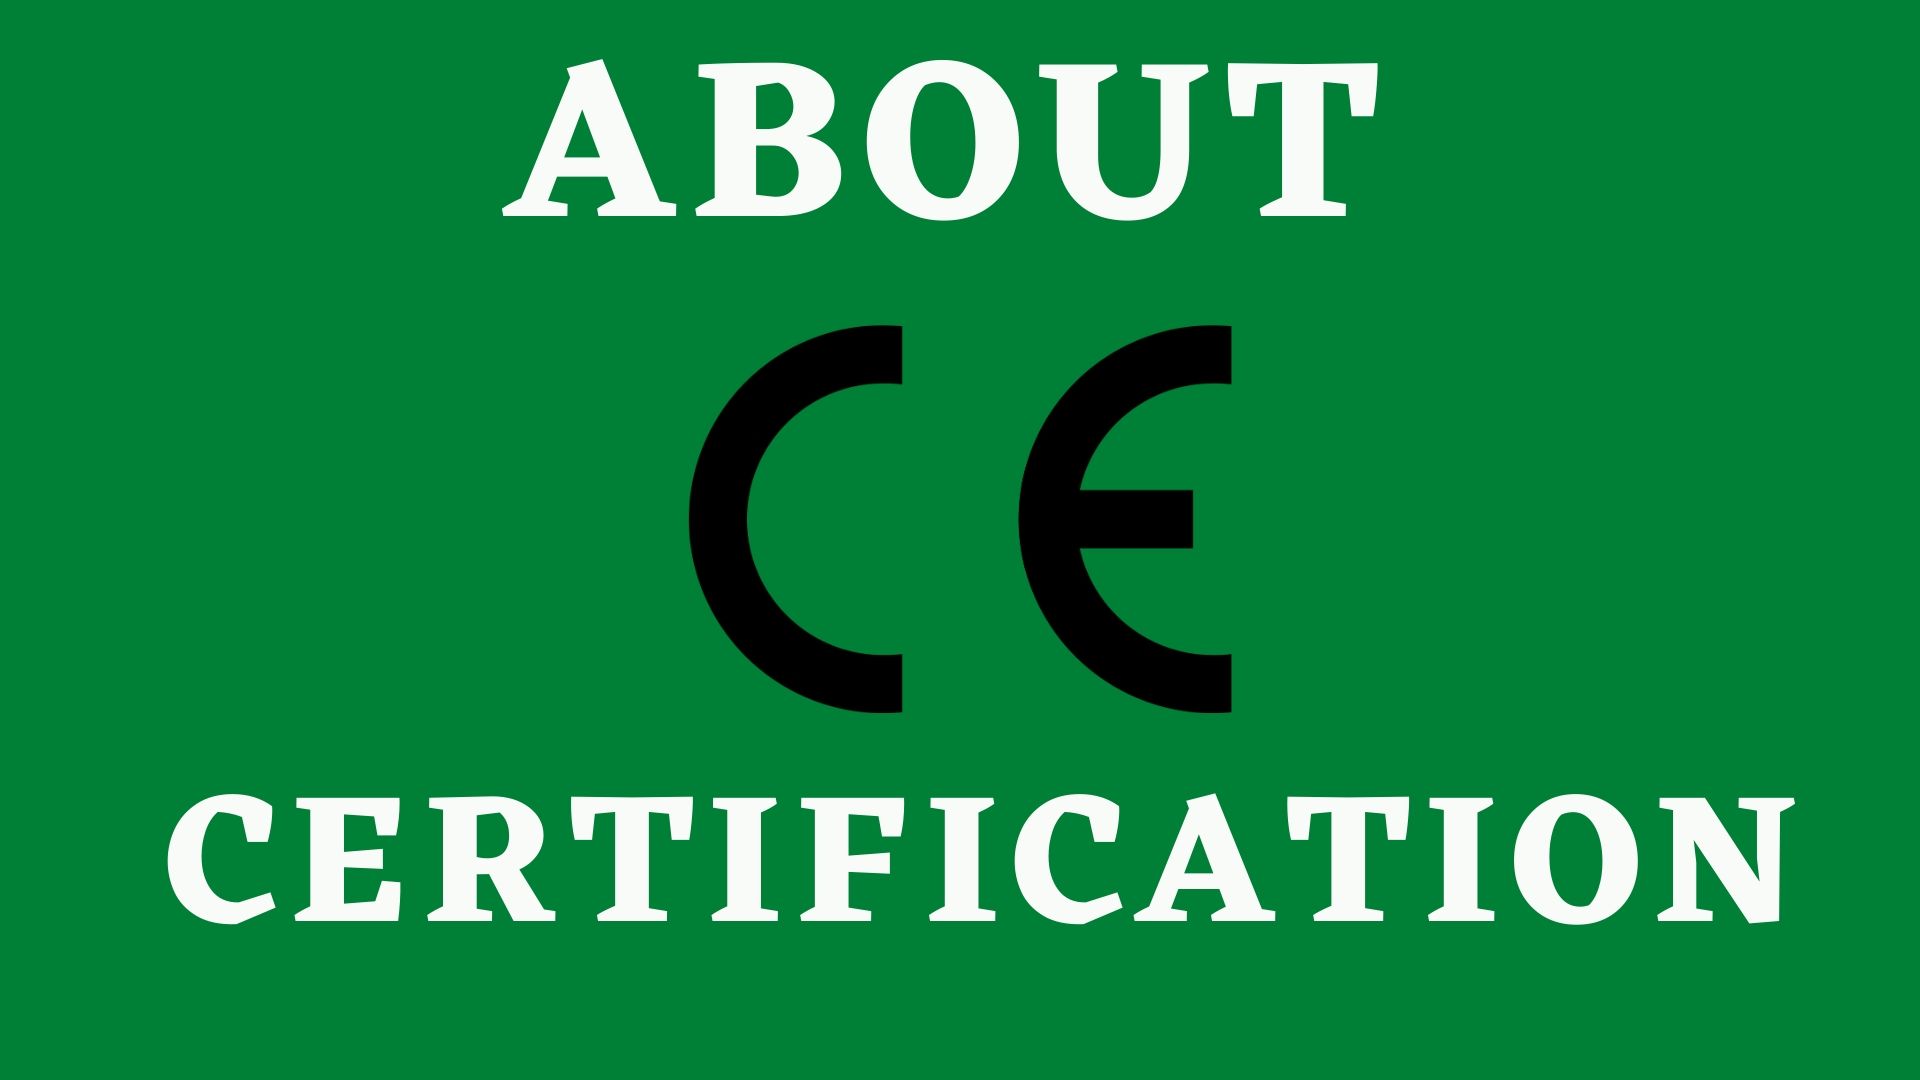 Know more about CE Certification